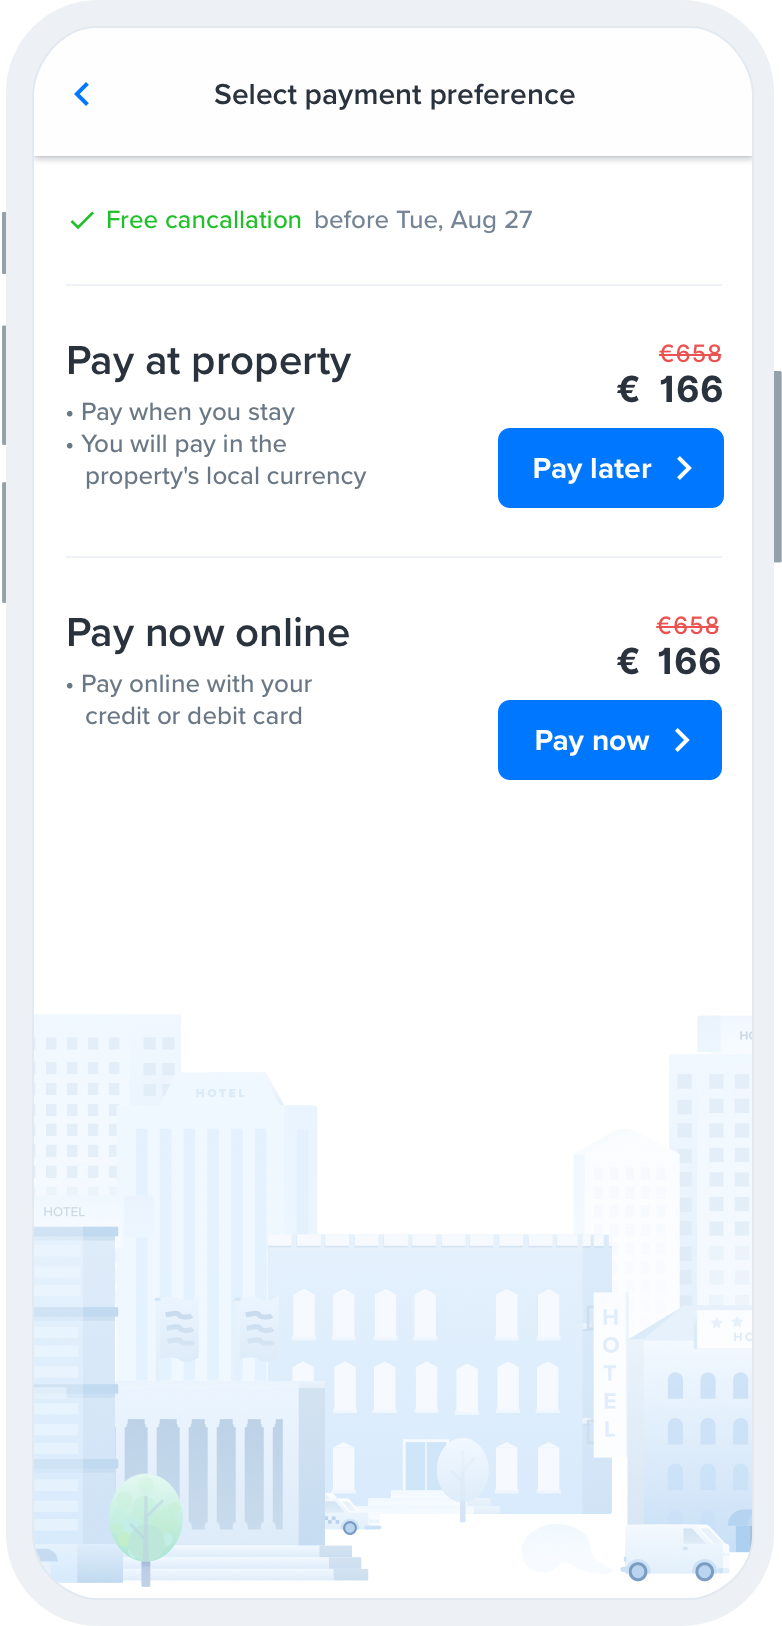 UXCase study: Pay later